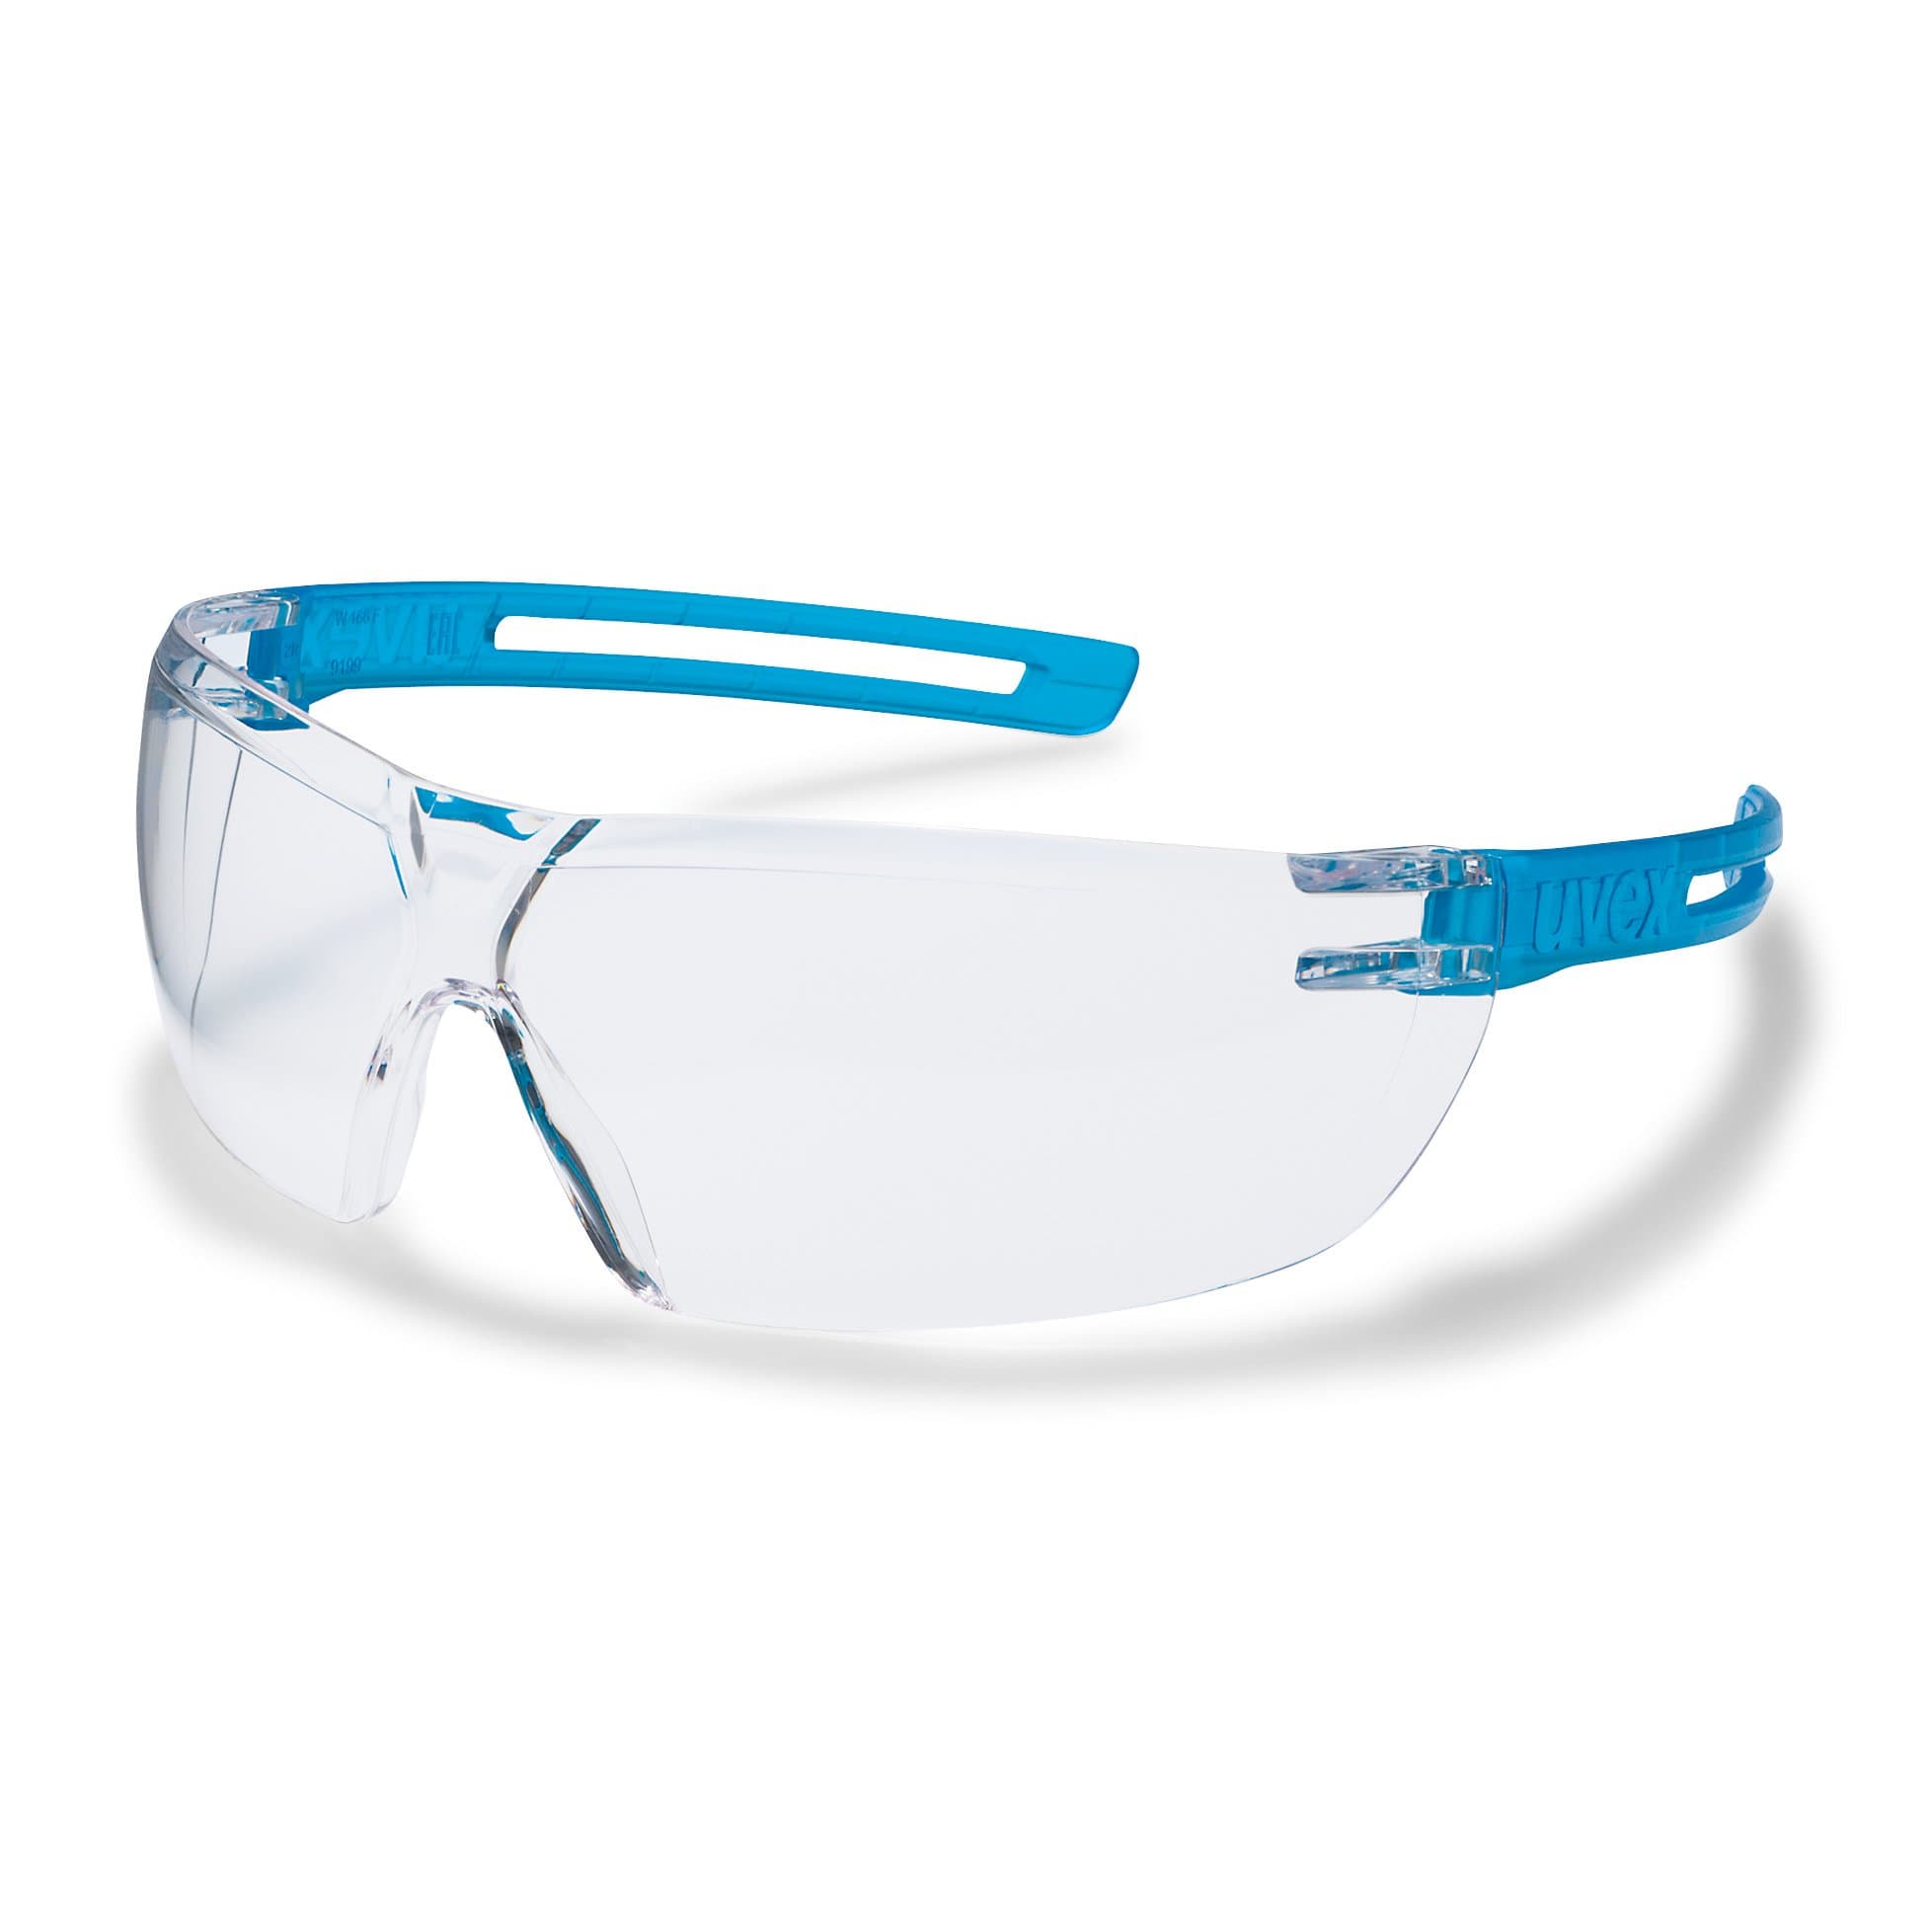 UVEX X-Fit Eye Protection Spectacles